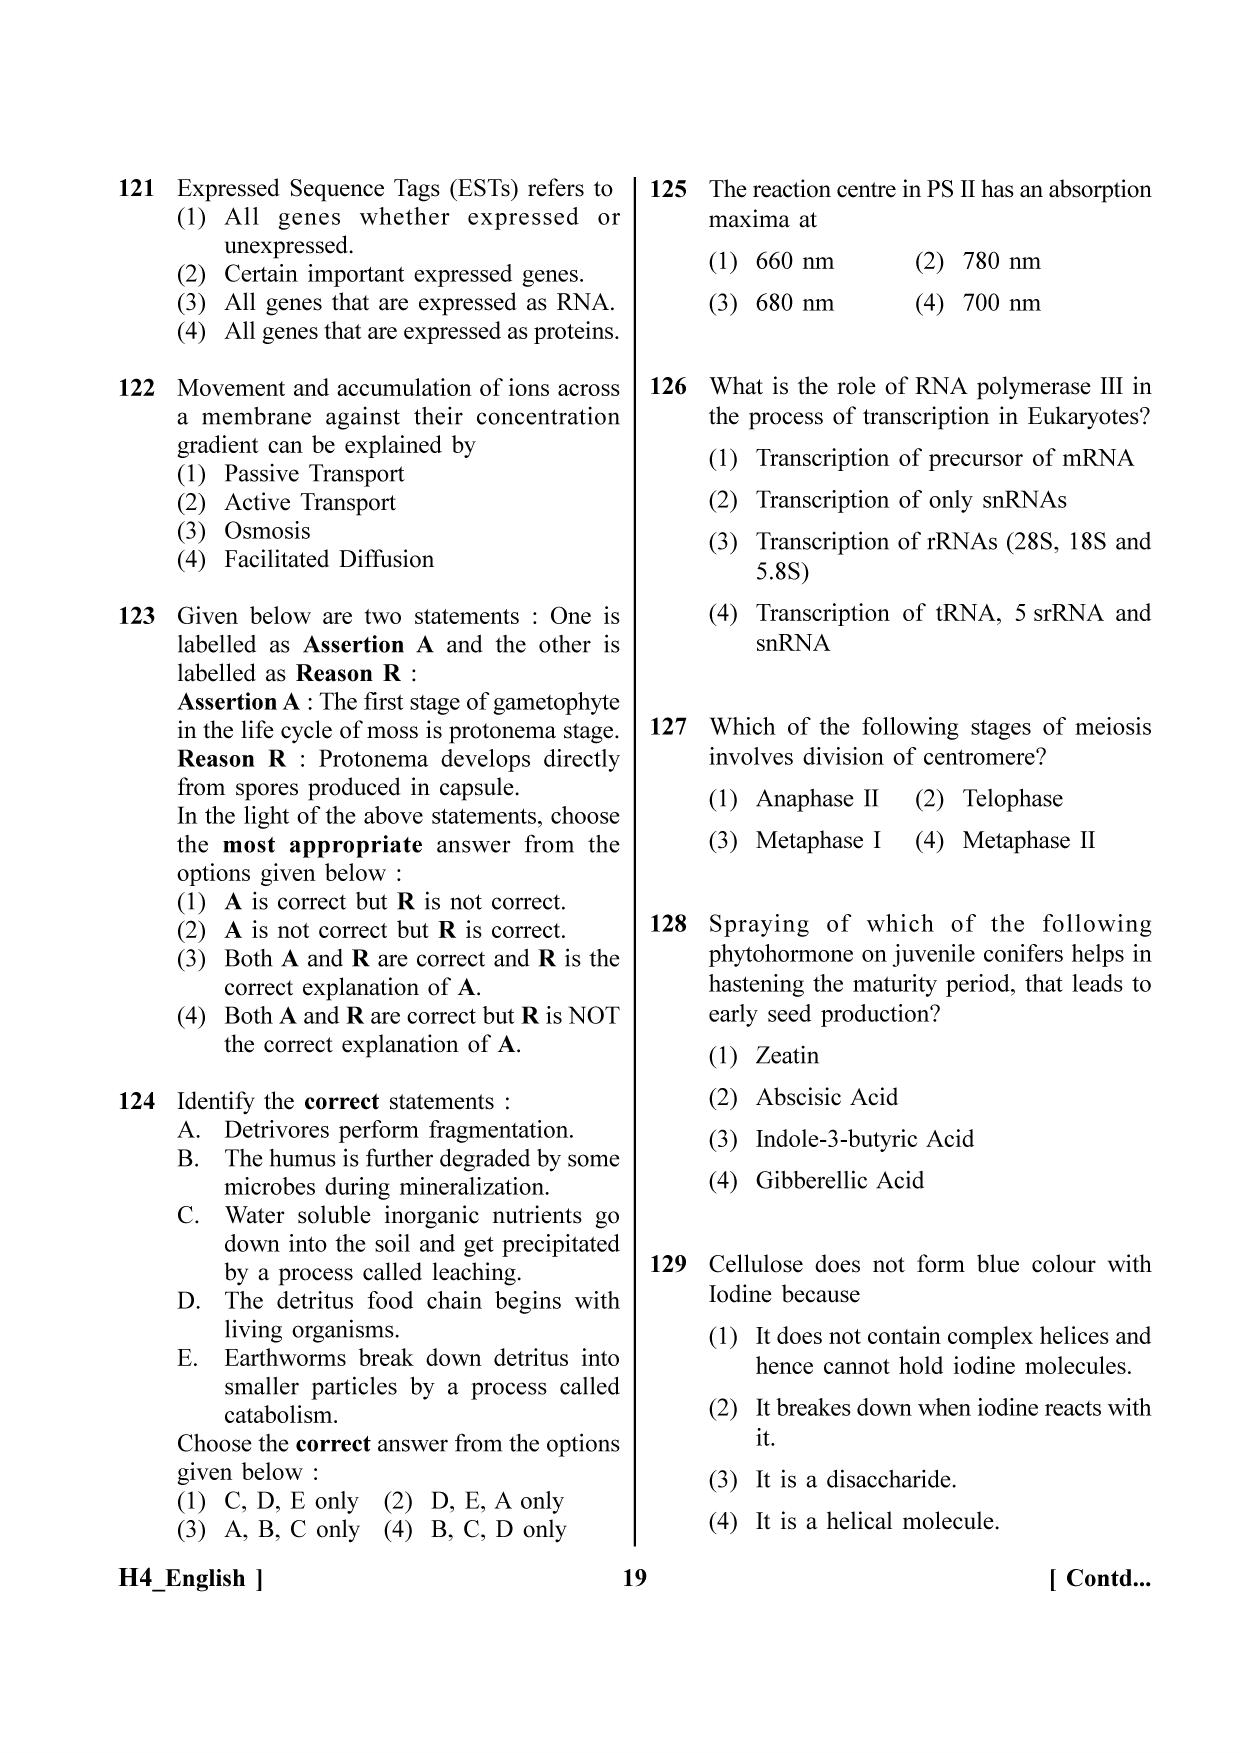 NEET 2023 H4 Question Paper - Page 19